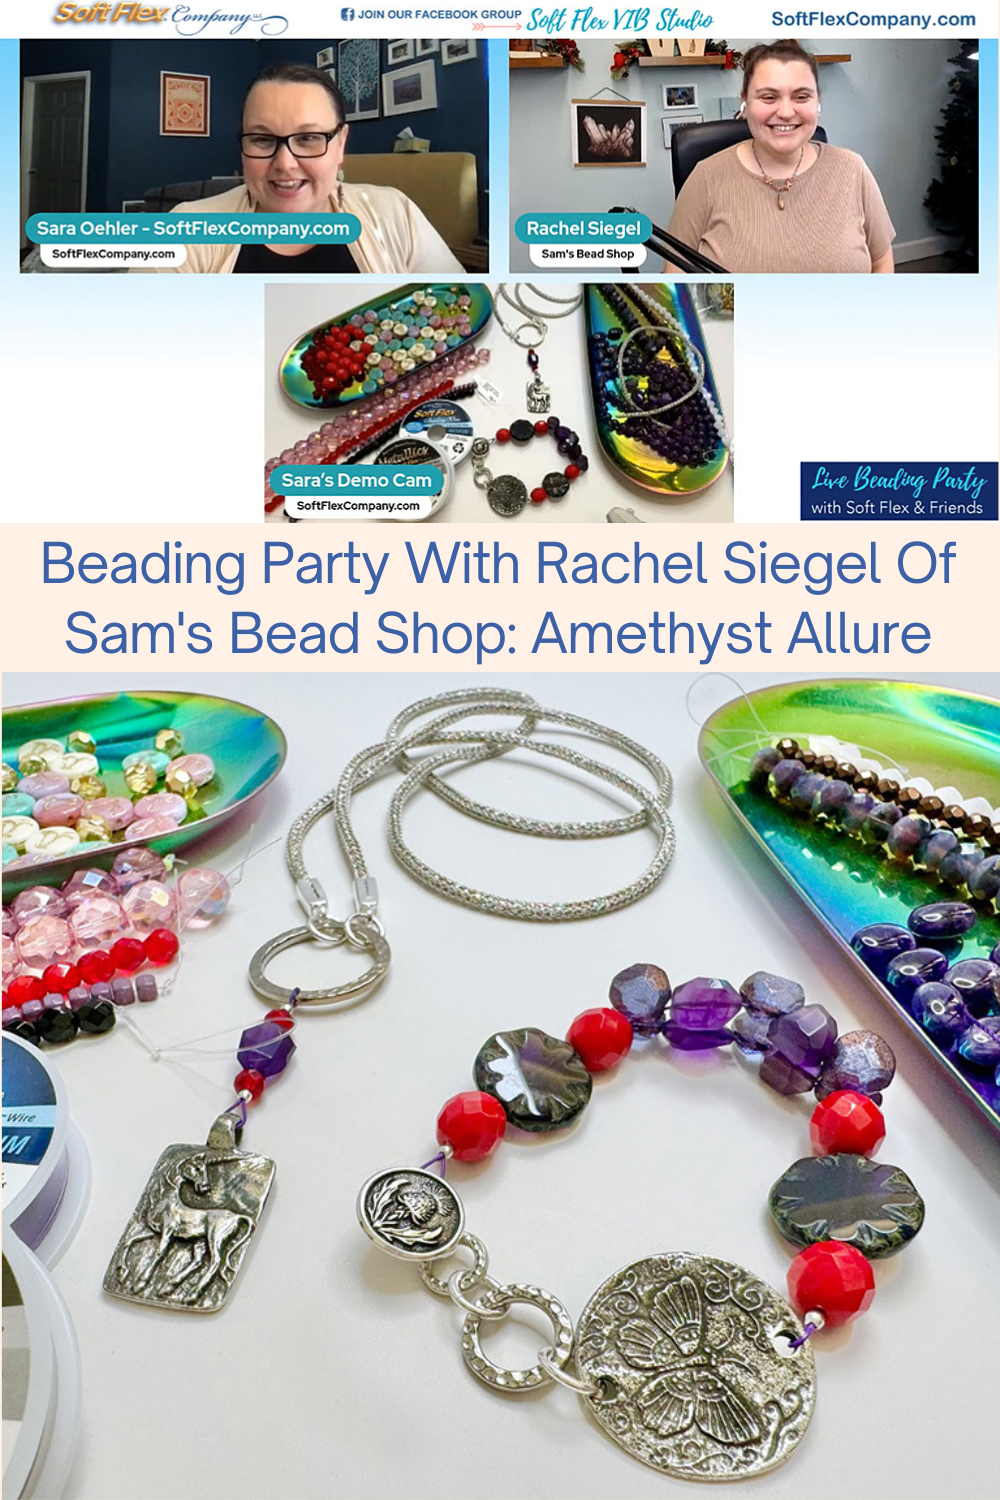 Beading Party With Rachel Siegel Of Sam's Bead Shop Amethyst Allure Collage